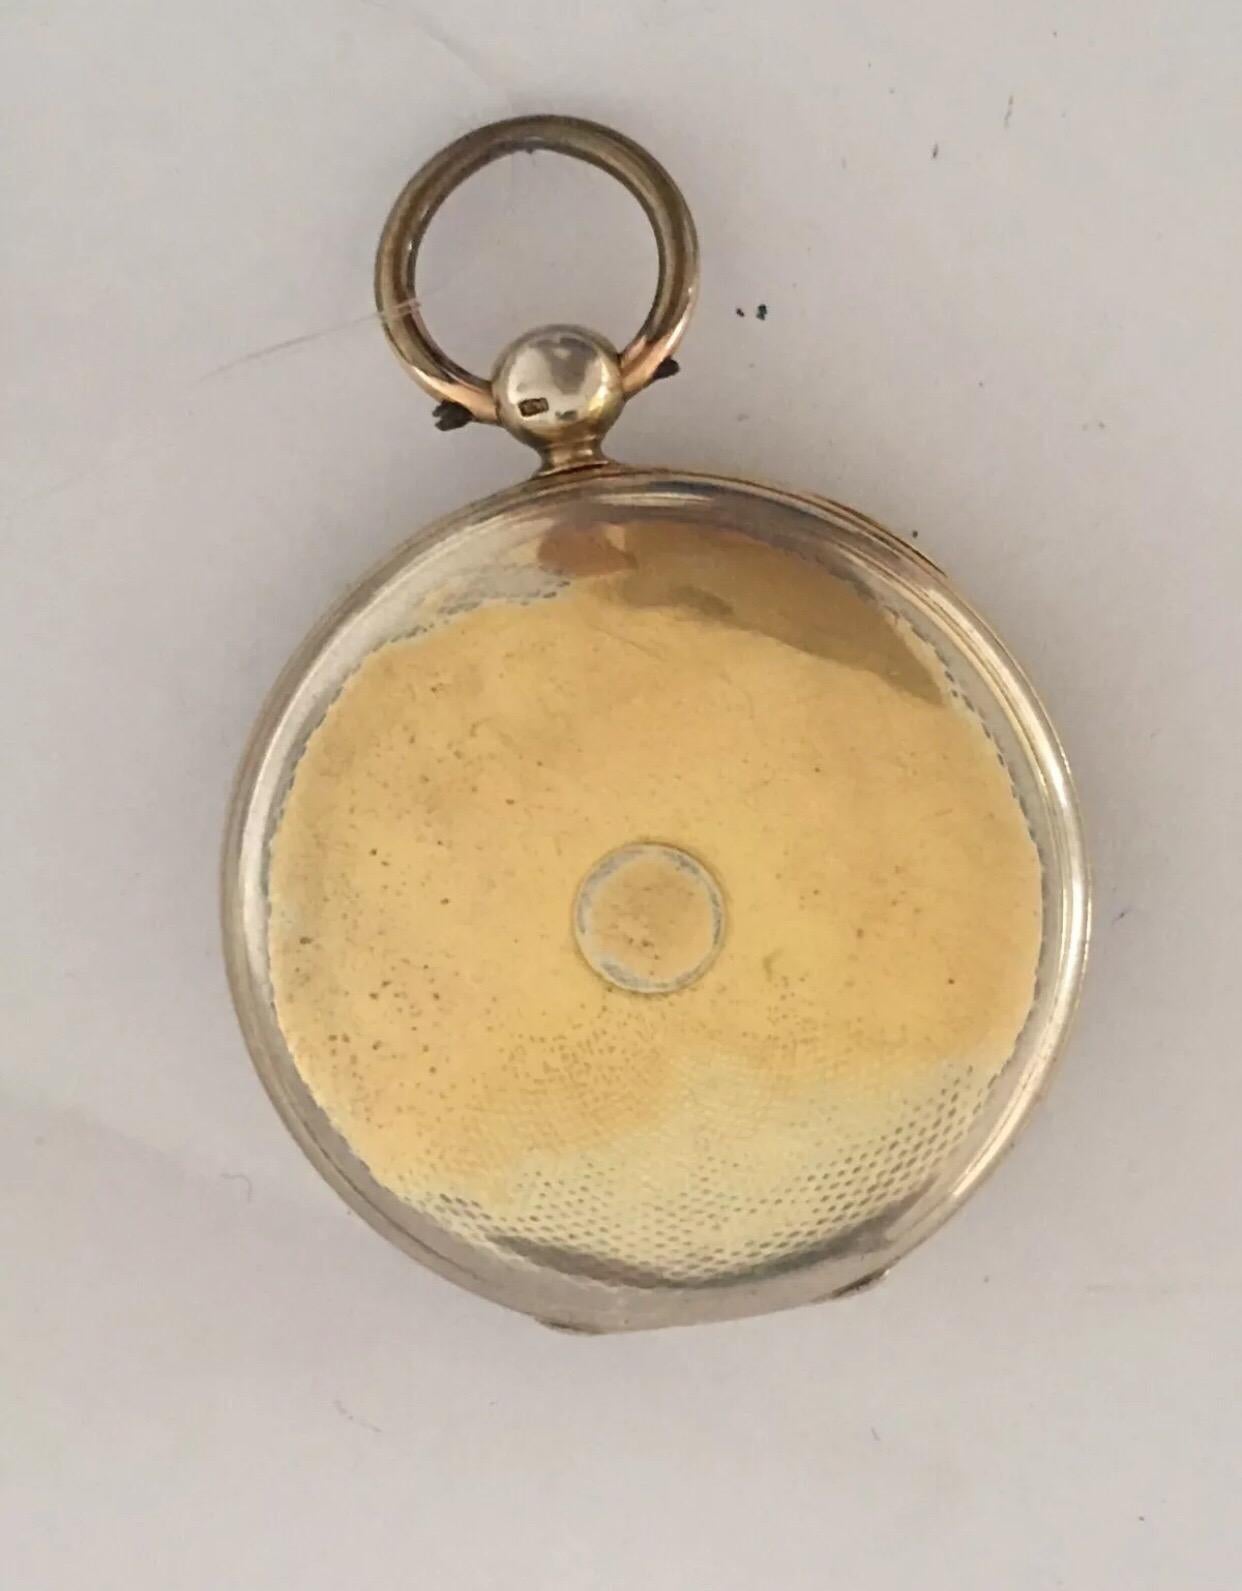 
Antique Silver Gilt English Lever Fusee Pocket Watch By Frodsham, London c.1840

This Watch is Not working. the spring is broken. But the Balance wheel is good and spinning when shake. The silver gilt Case is rubbed out. Visible chipped on the